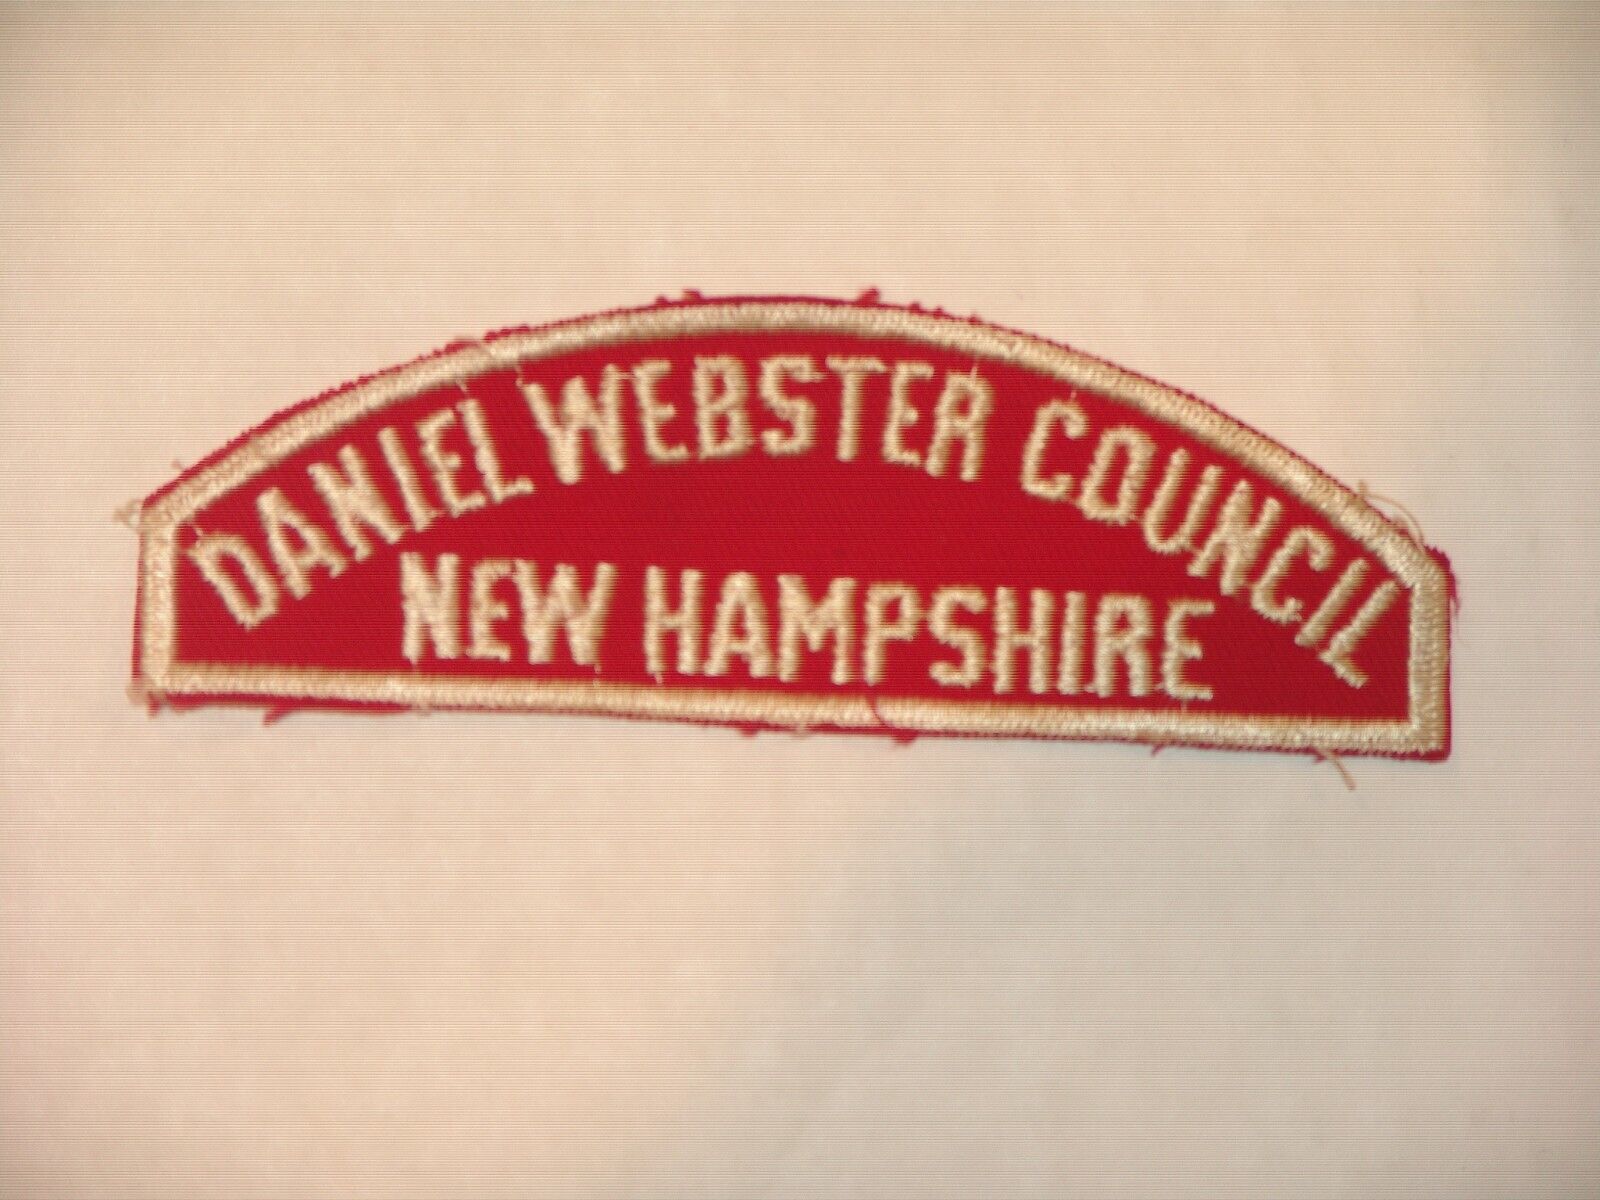 red & white - Daniel Webster Council